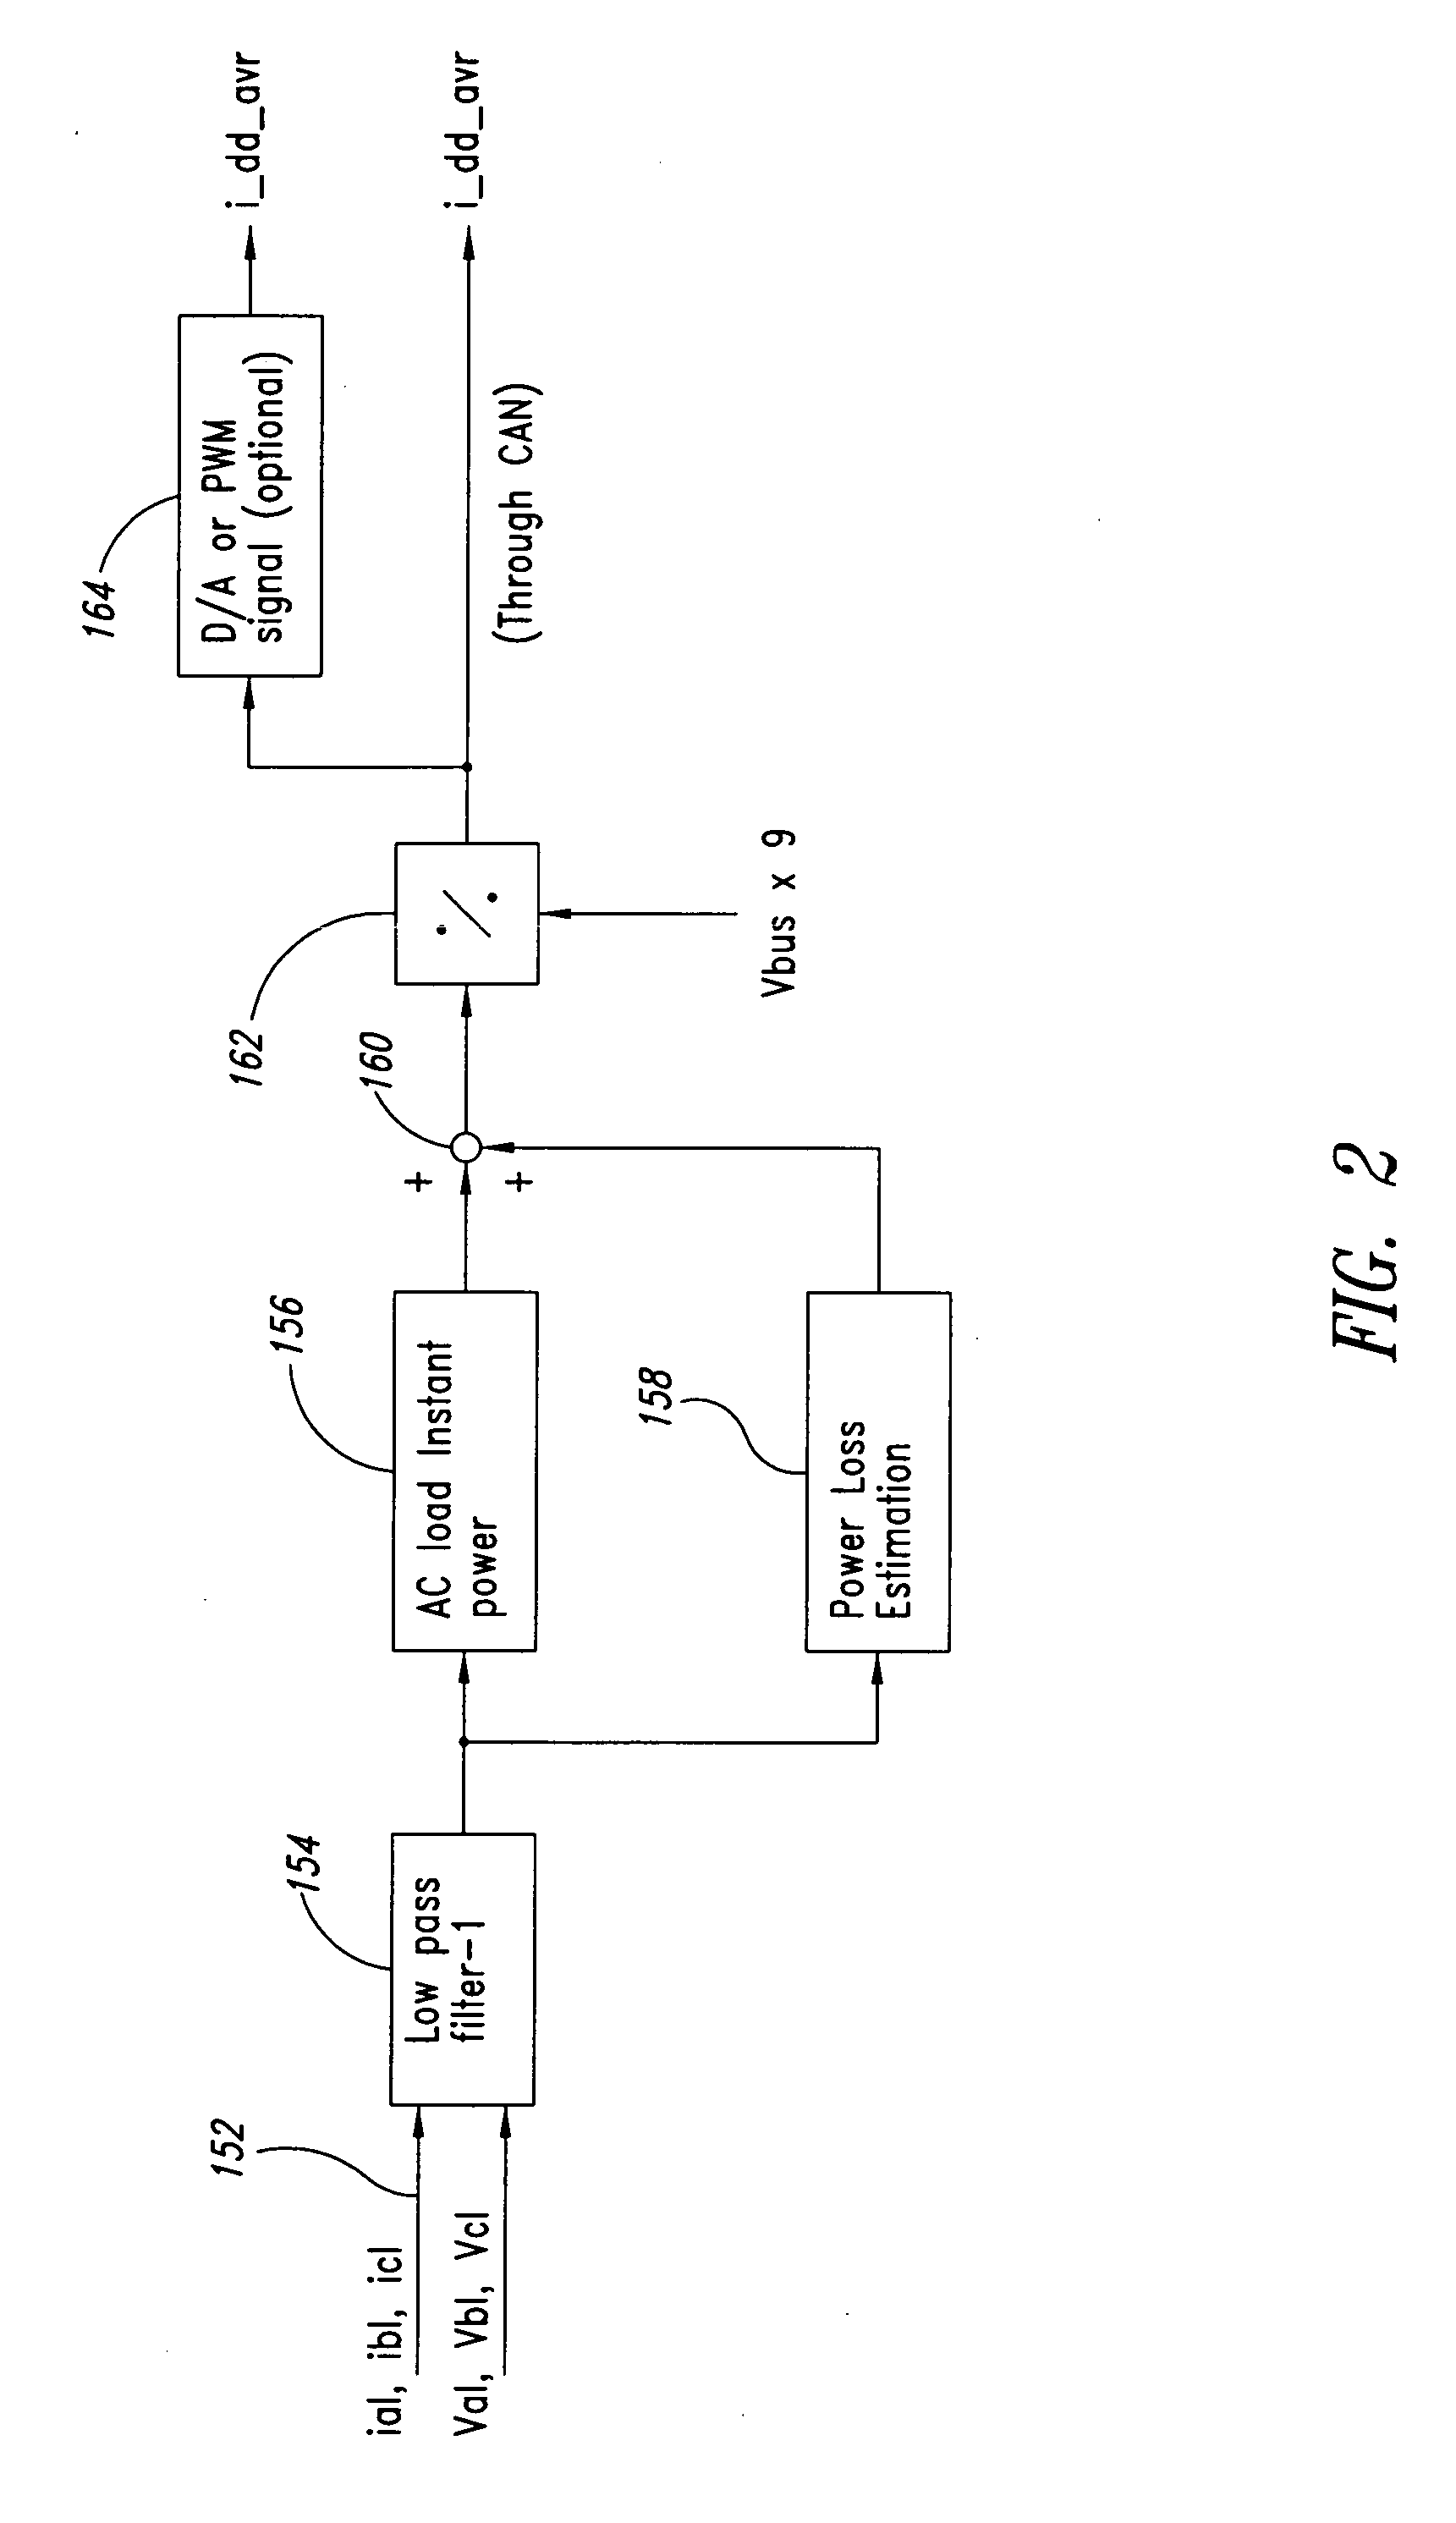 Two-level protection for uninterrupted power supply